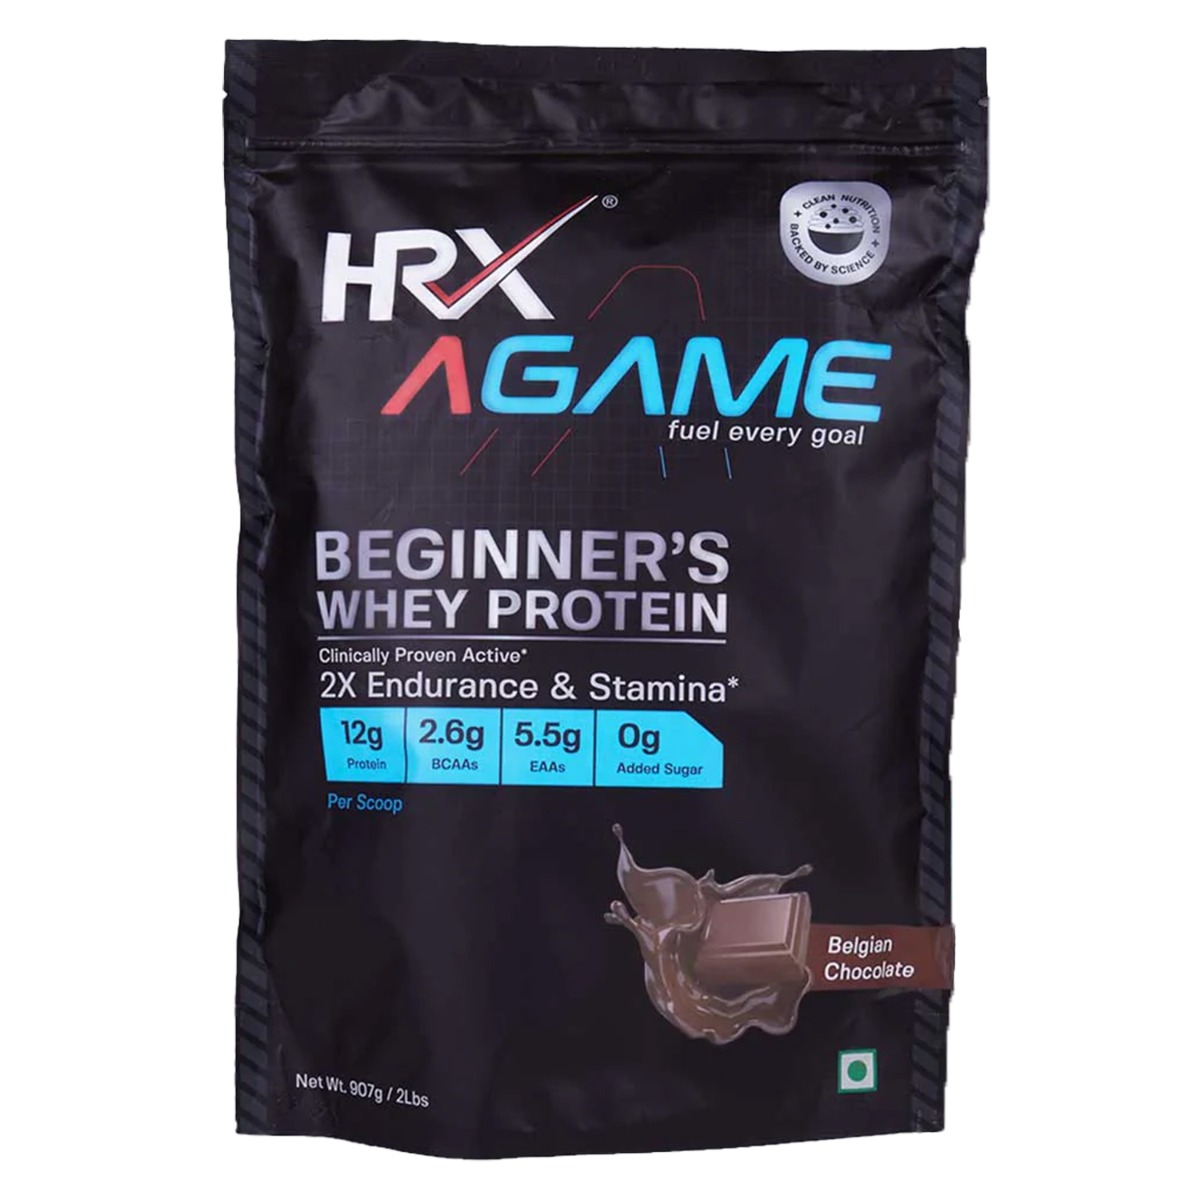 HRX Nutrition AGame Beginner’s Whey Protein - Belgian Chocolate, 907gm